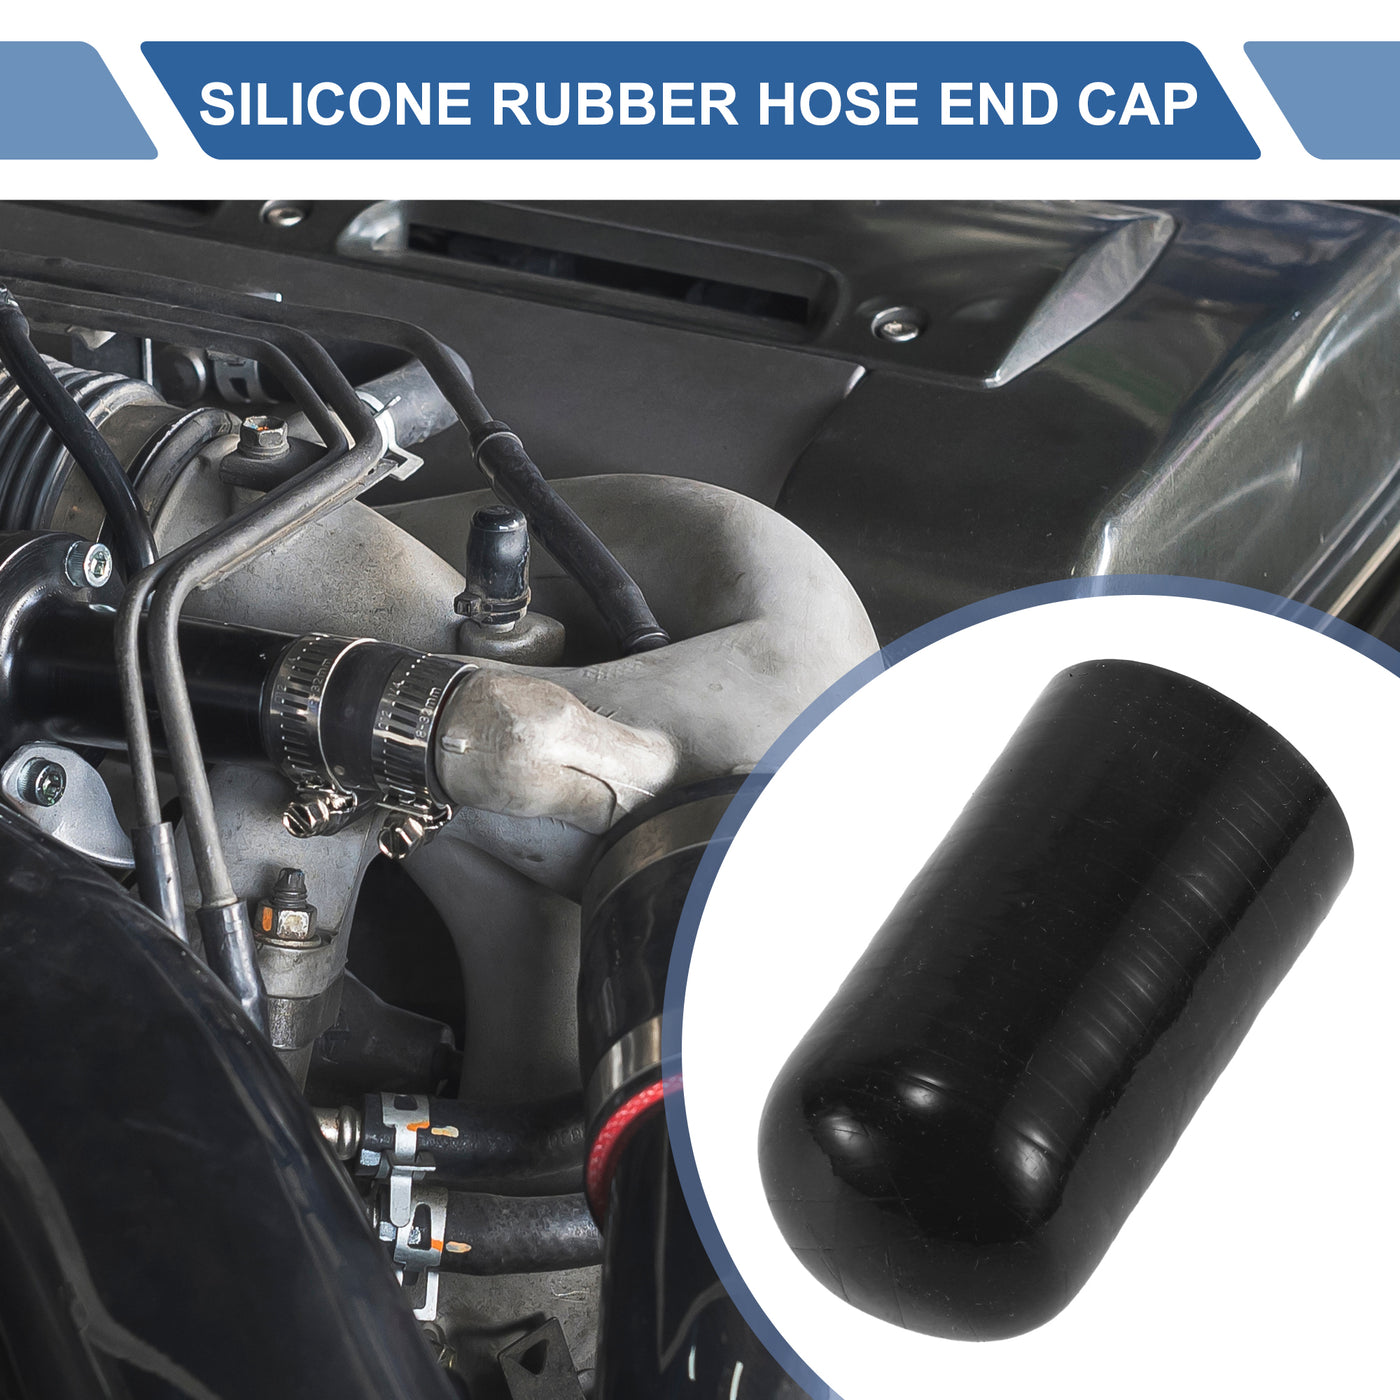 X AUTOHAUX 1 Pcs 60mm Length 30mm/1.18" ID Black Car Silicone Rubber Hose End Cap with Clamp Silicone Reinforced Blanking Cap for Bypass Tube Universal